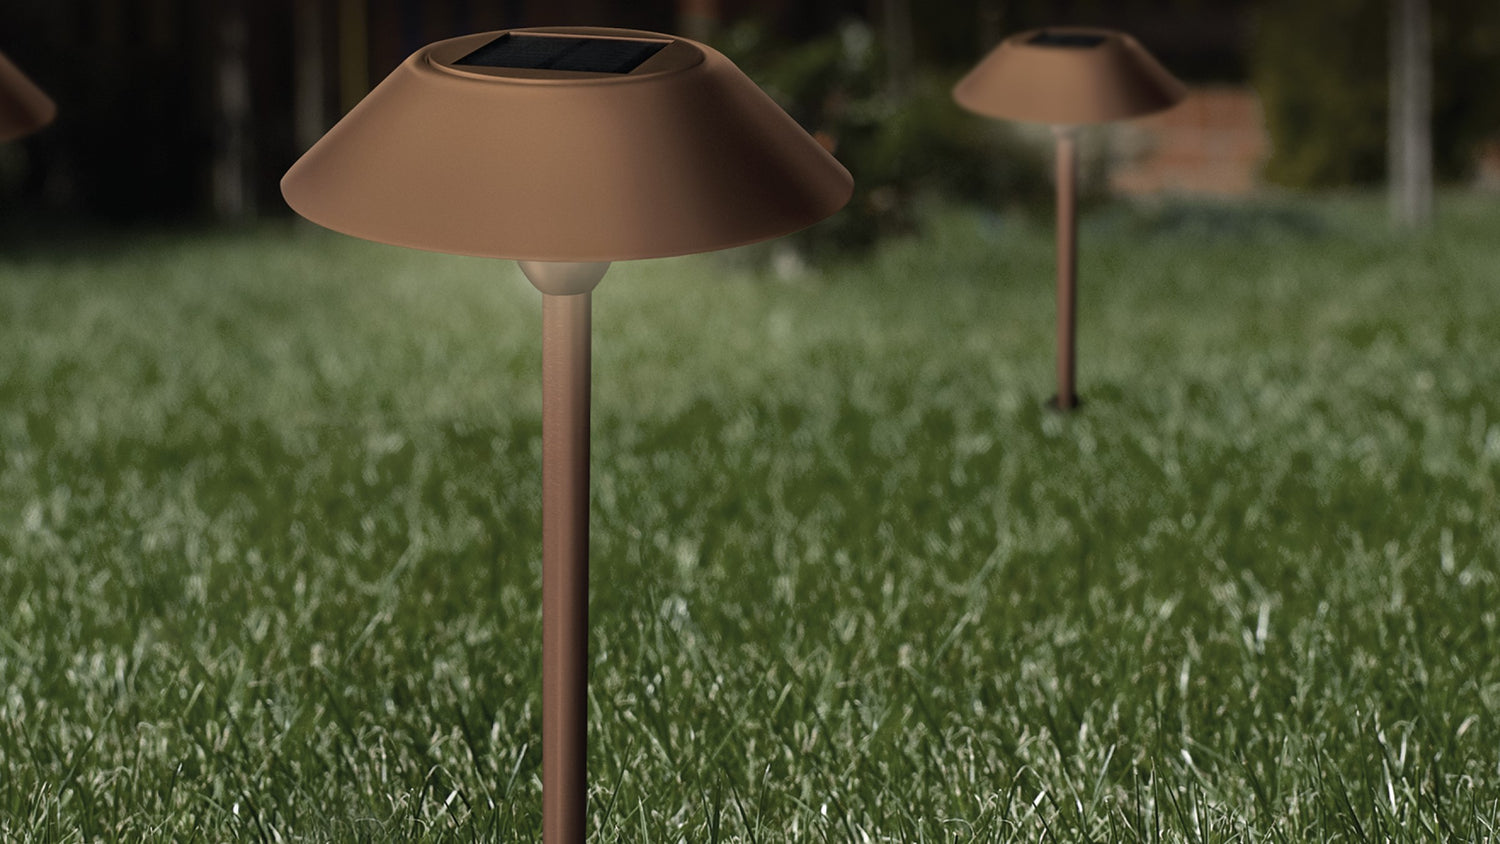 OneSync Landscape Solar Pathway Lights Available at Ace Hardware